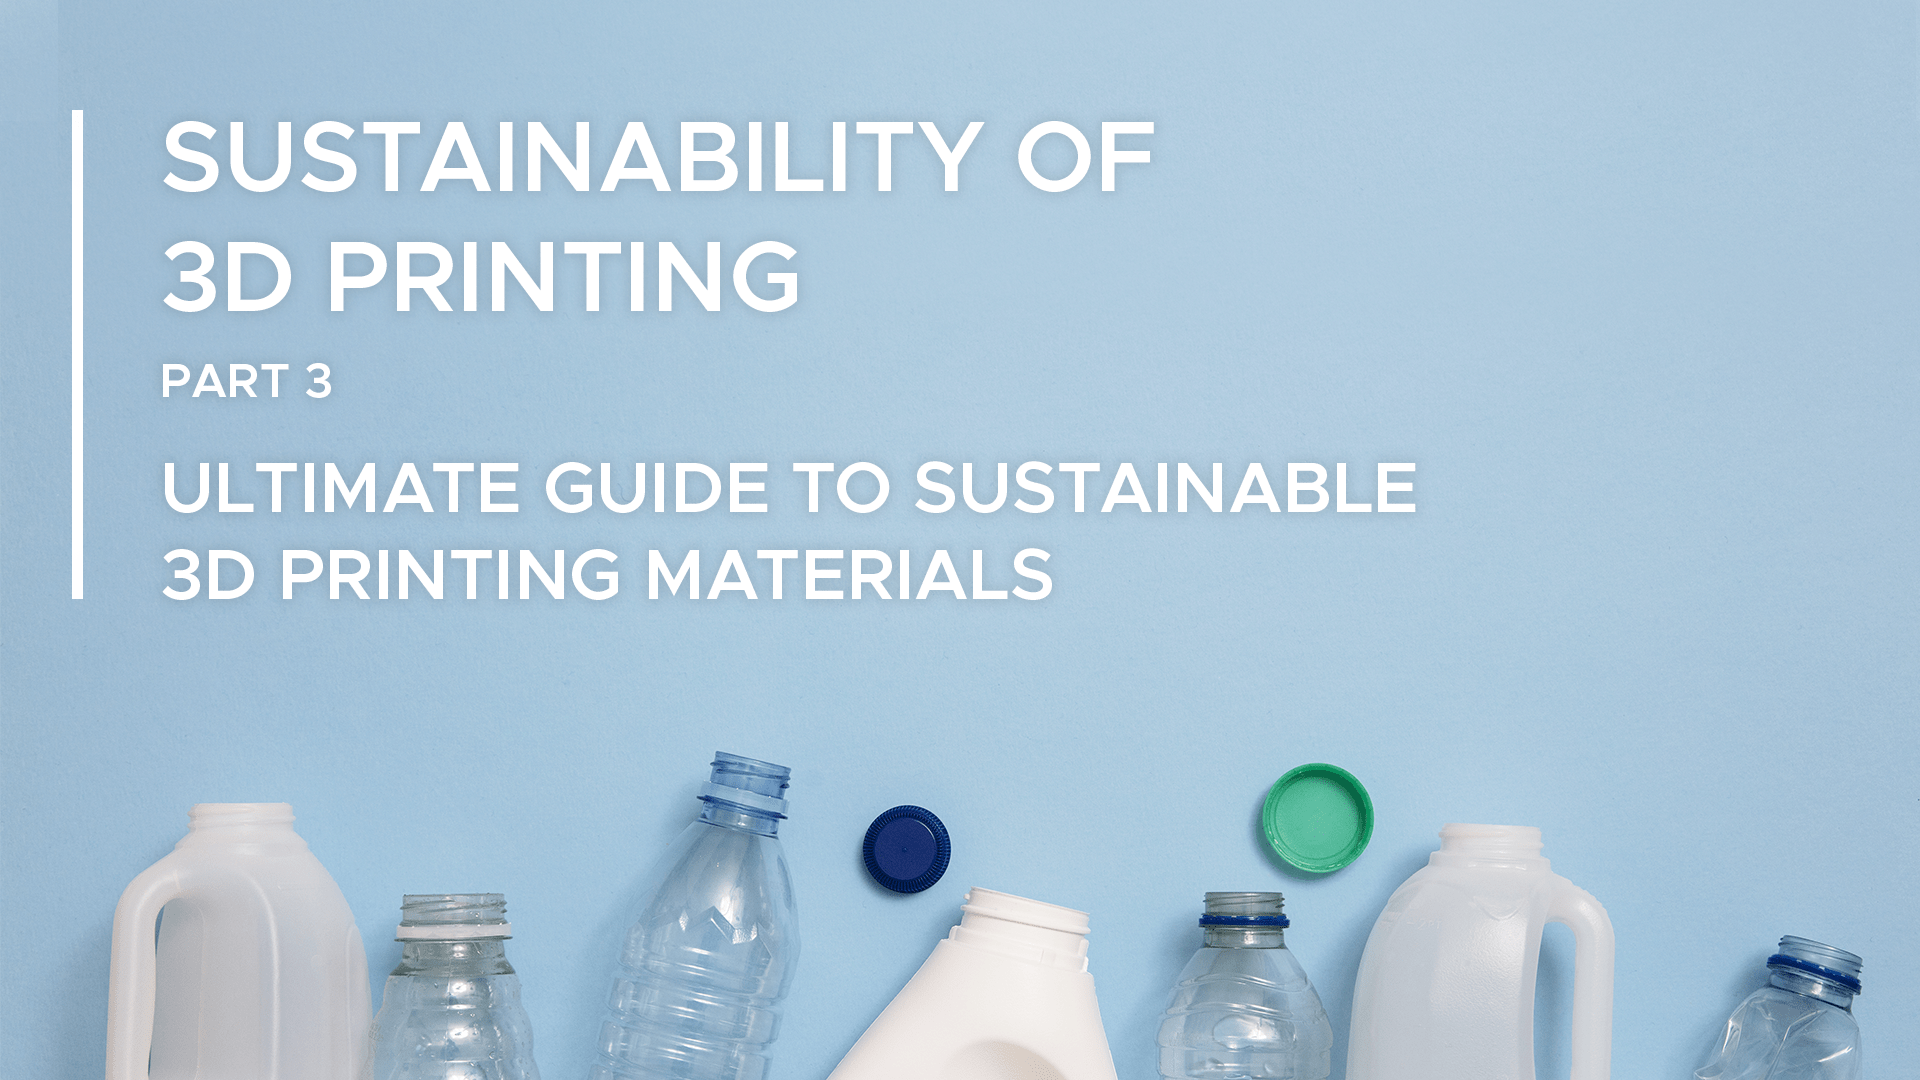 Ultimate guide to sustainable 3D materials: Pathing the way for a circular - Replique